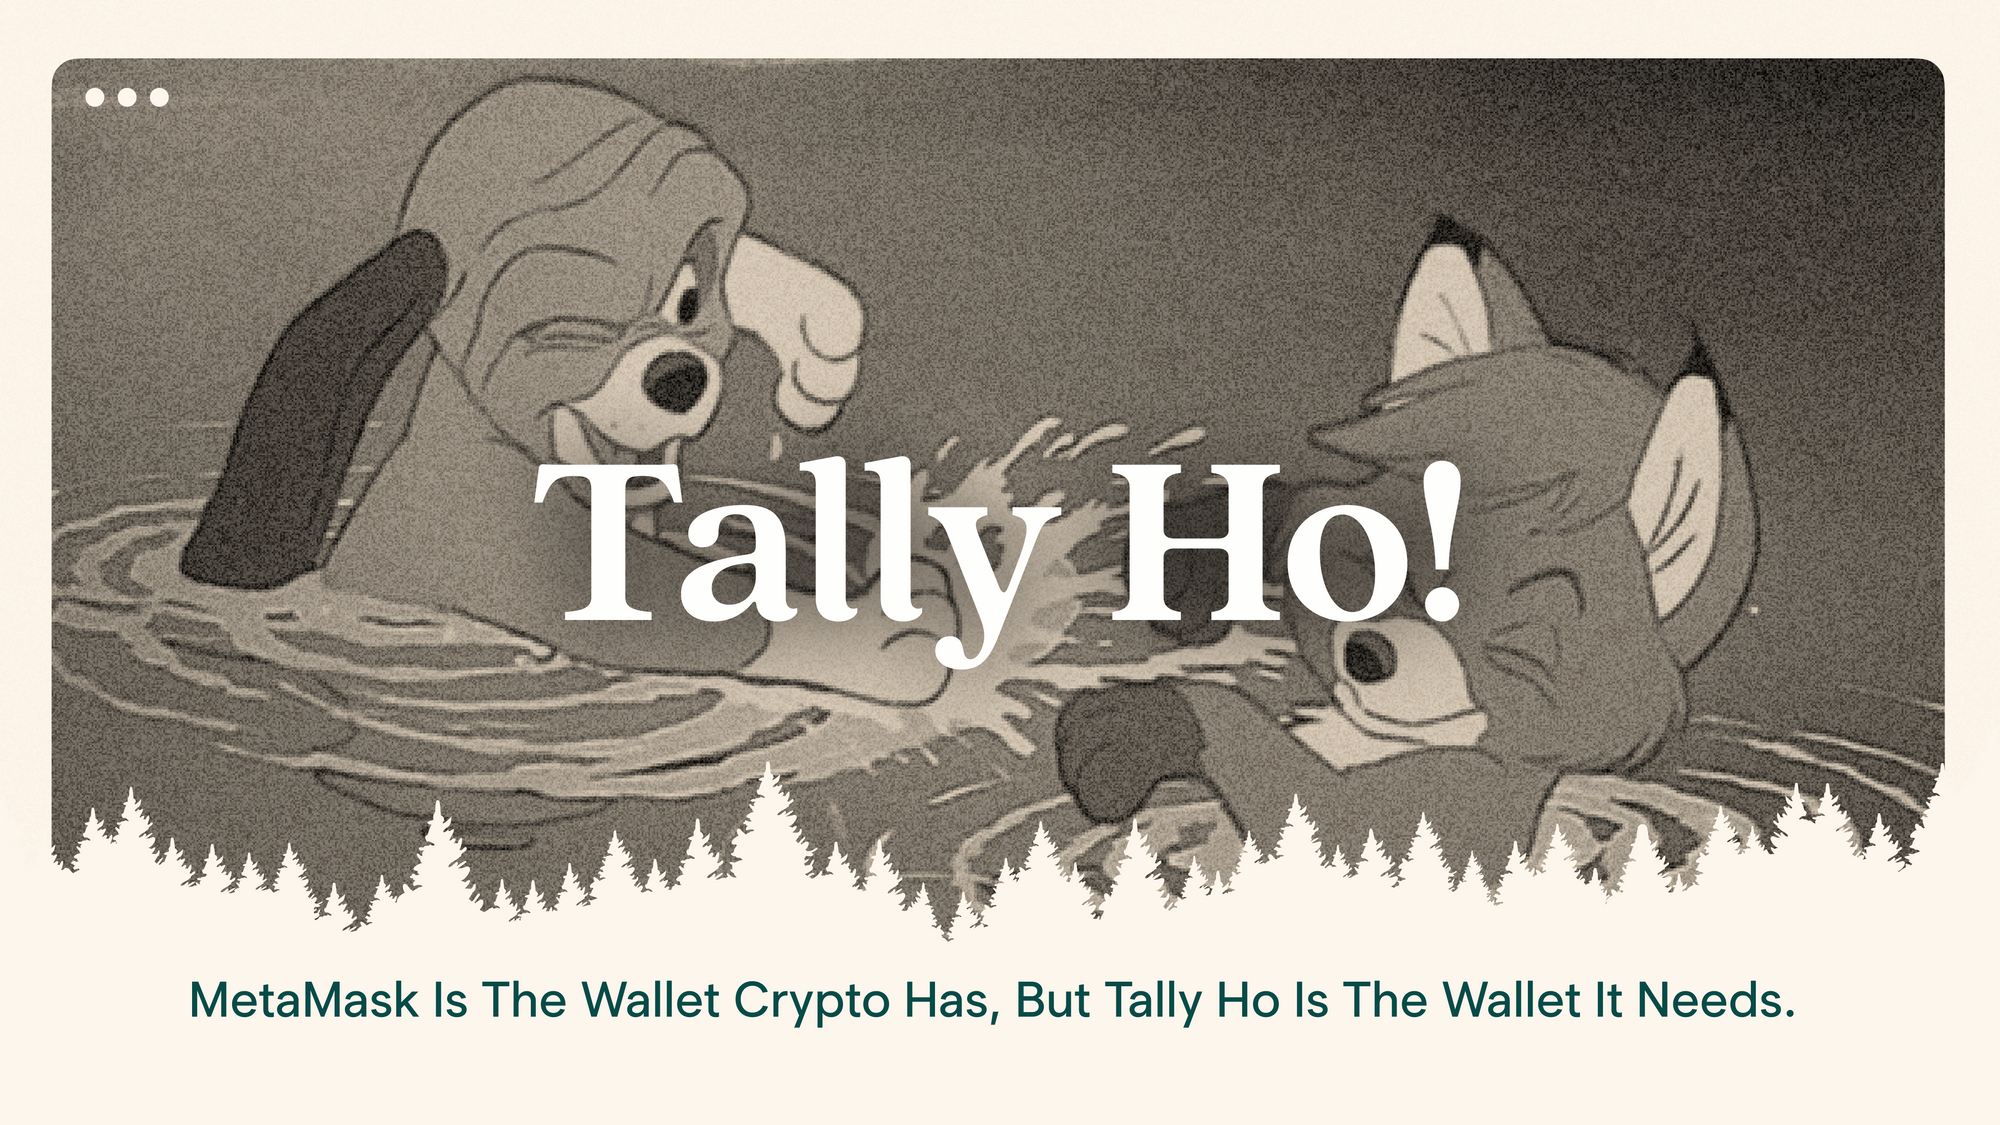 Tally Ho Is The Wallet Web3 Needs